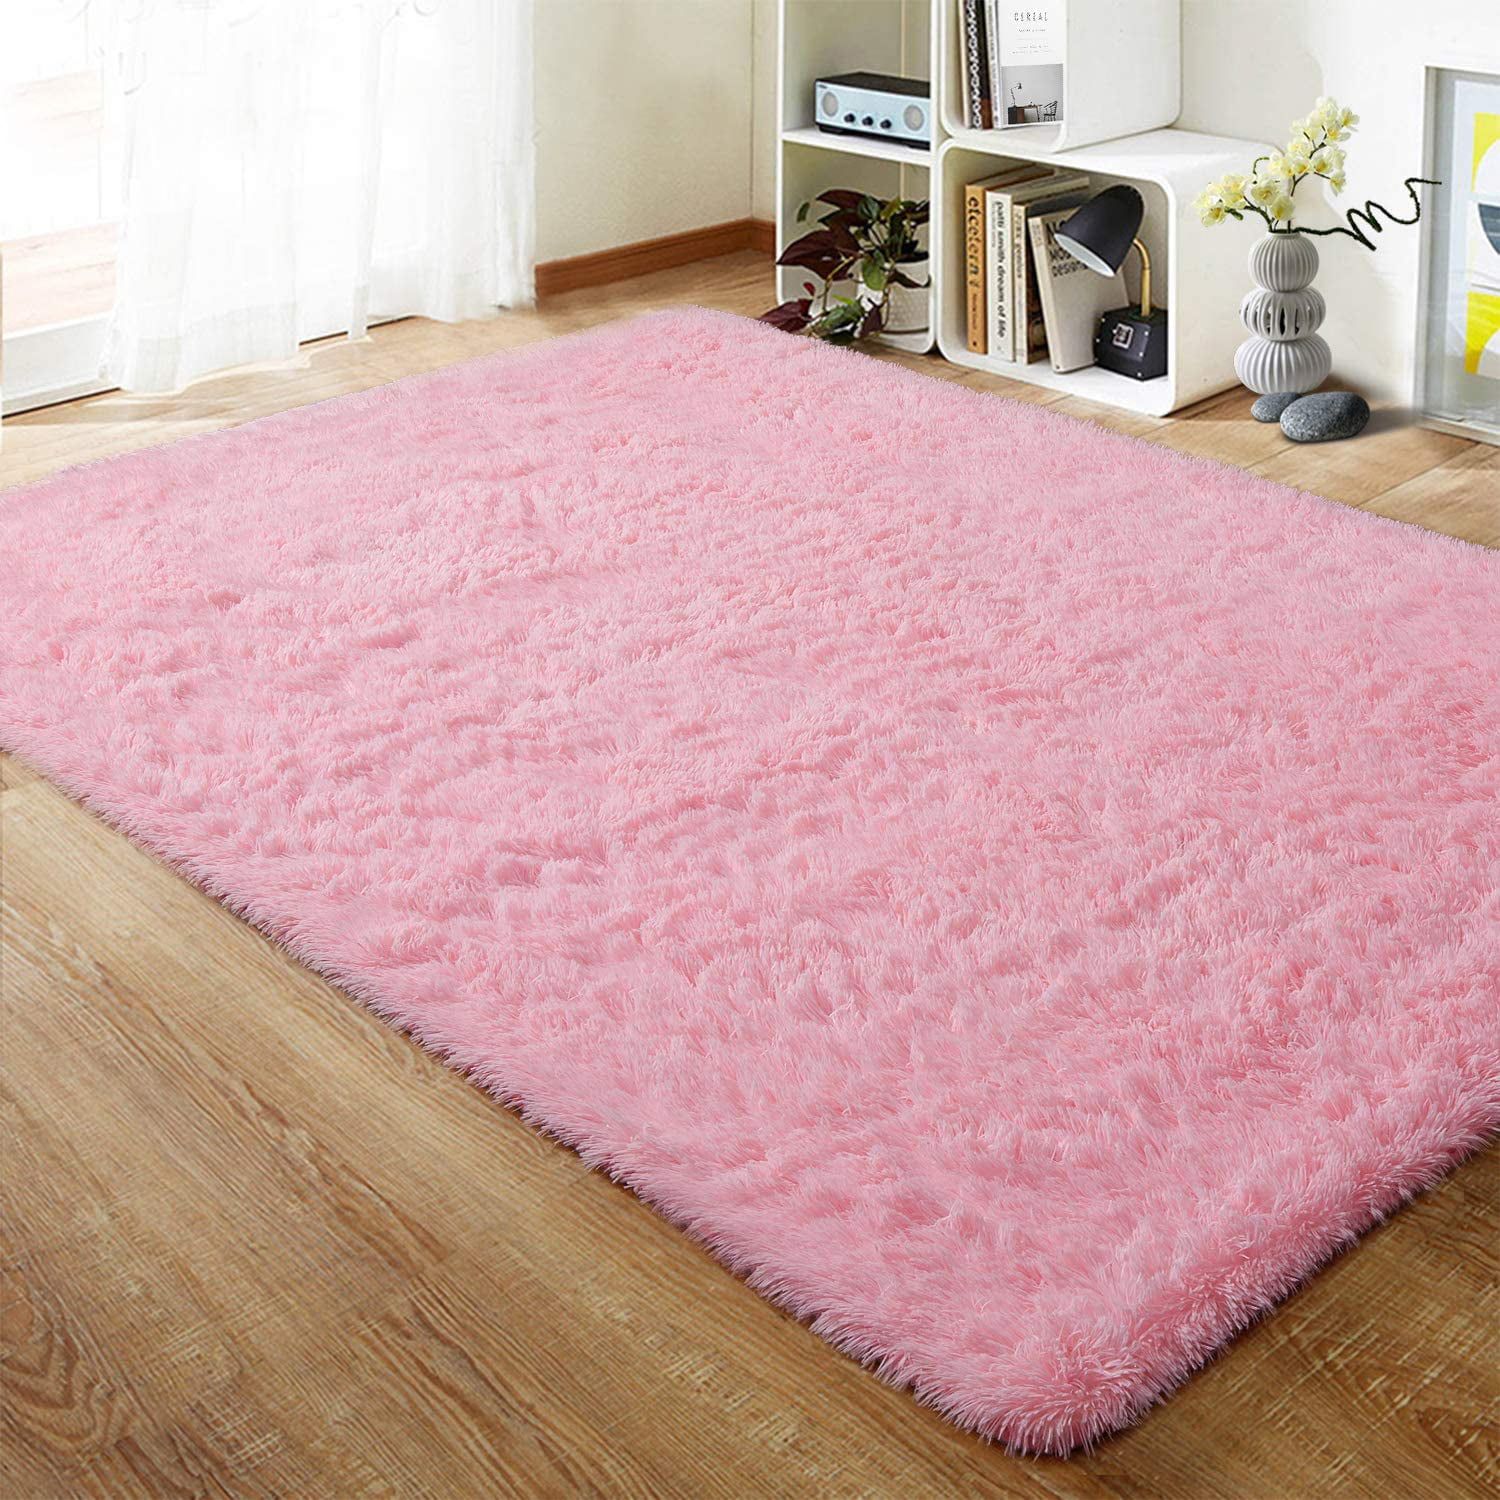 Lochas Soft Shag Carpet Fluffy Rug For Living Room Bedroom Big Area Rugs  Floor Mat, 4'X6',Pink – Walmart For Pink Soft Touch Shag Rugs (View 6 of 15)